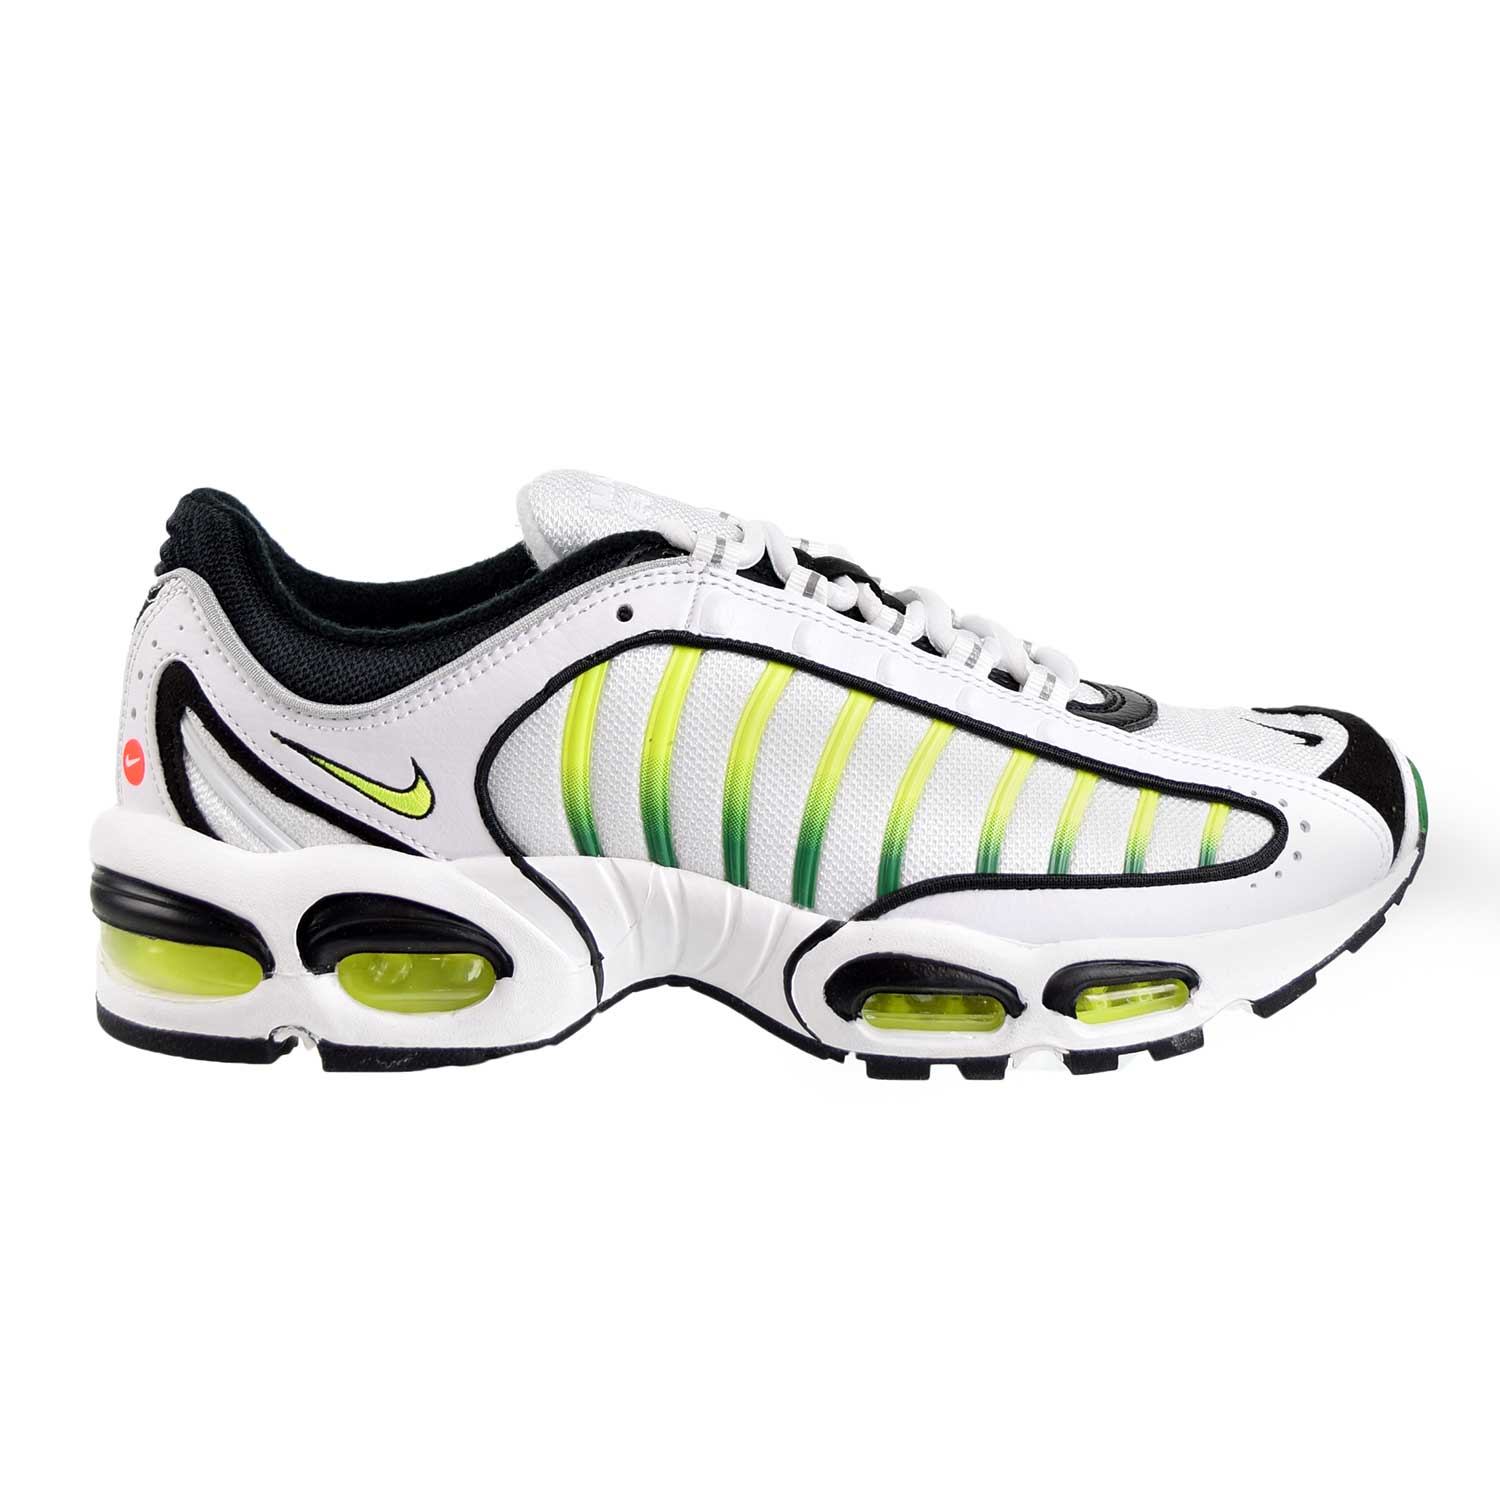 Several cure Rudely Nike Air Max Tailwind IV Mens Shoes White/Volt/Black/Aloe Verde aq2567-100